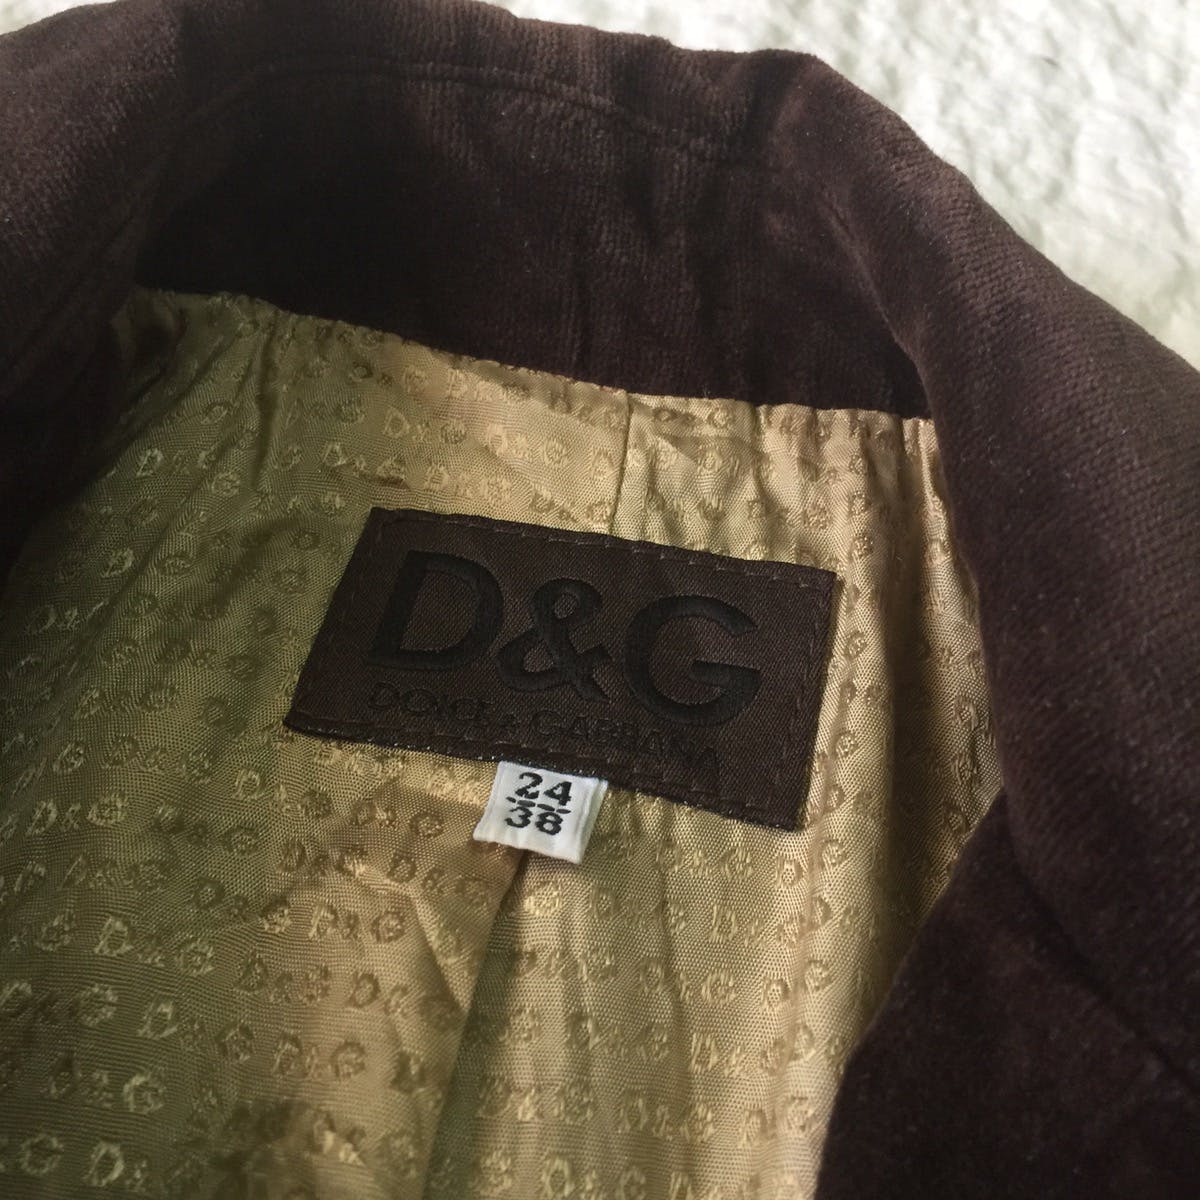 Authentic dolce & gabbana jacket made in Italy - 7